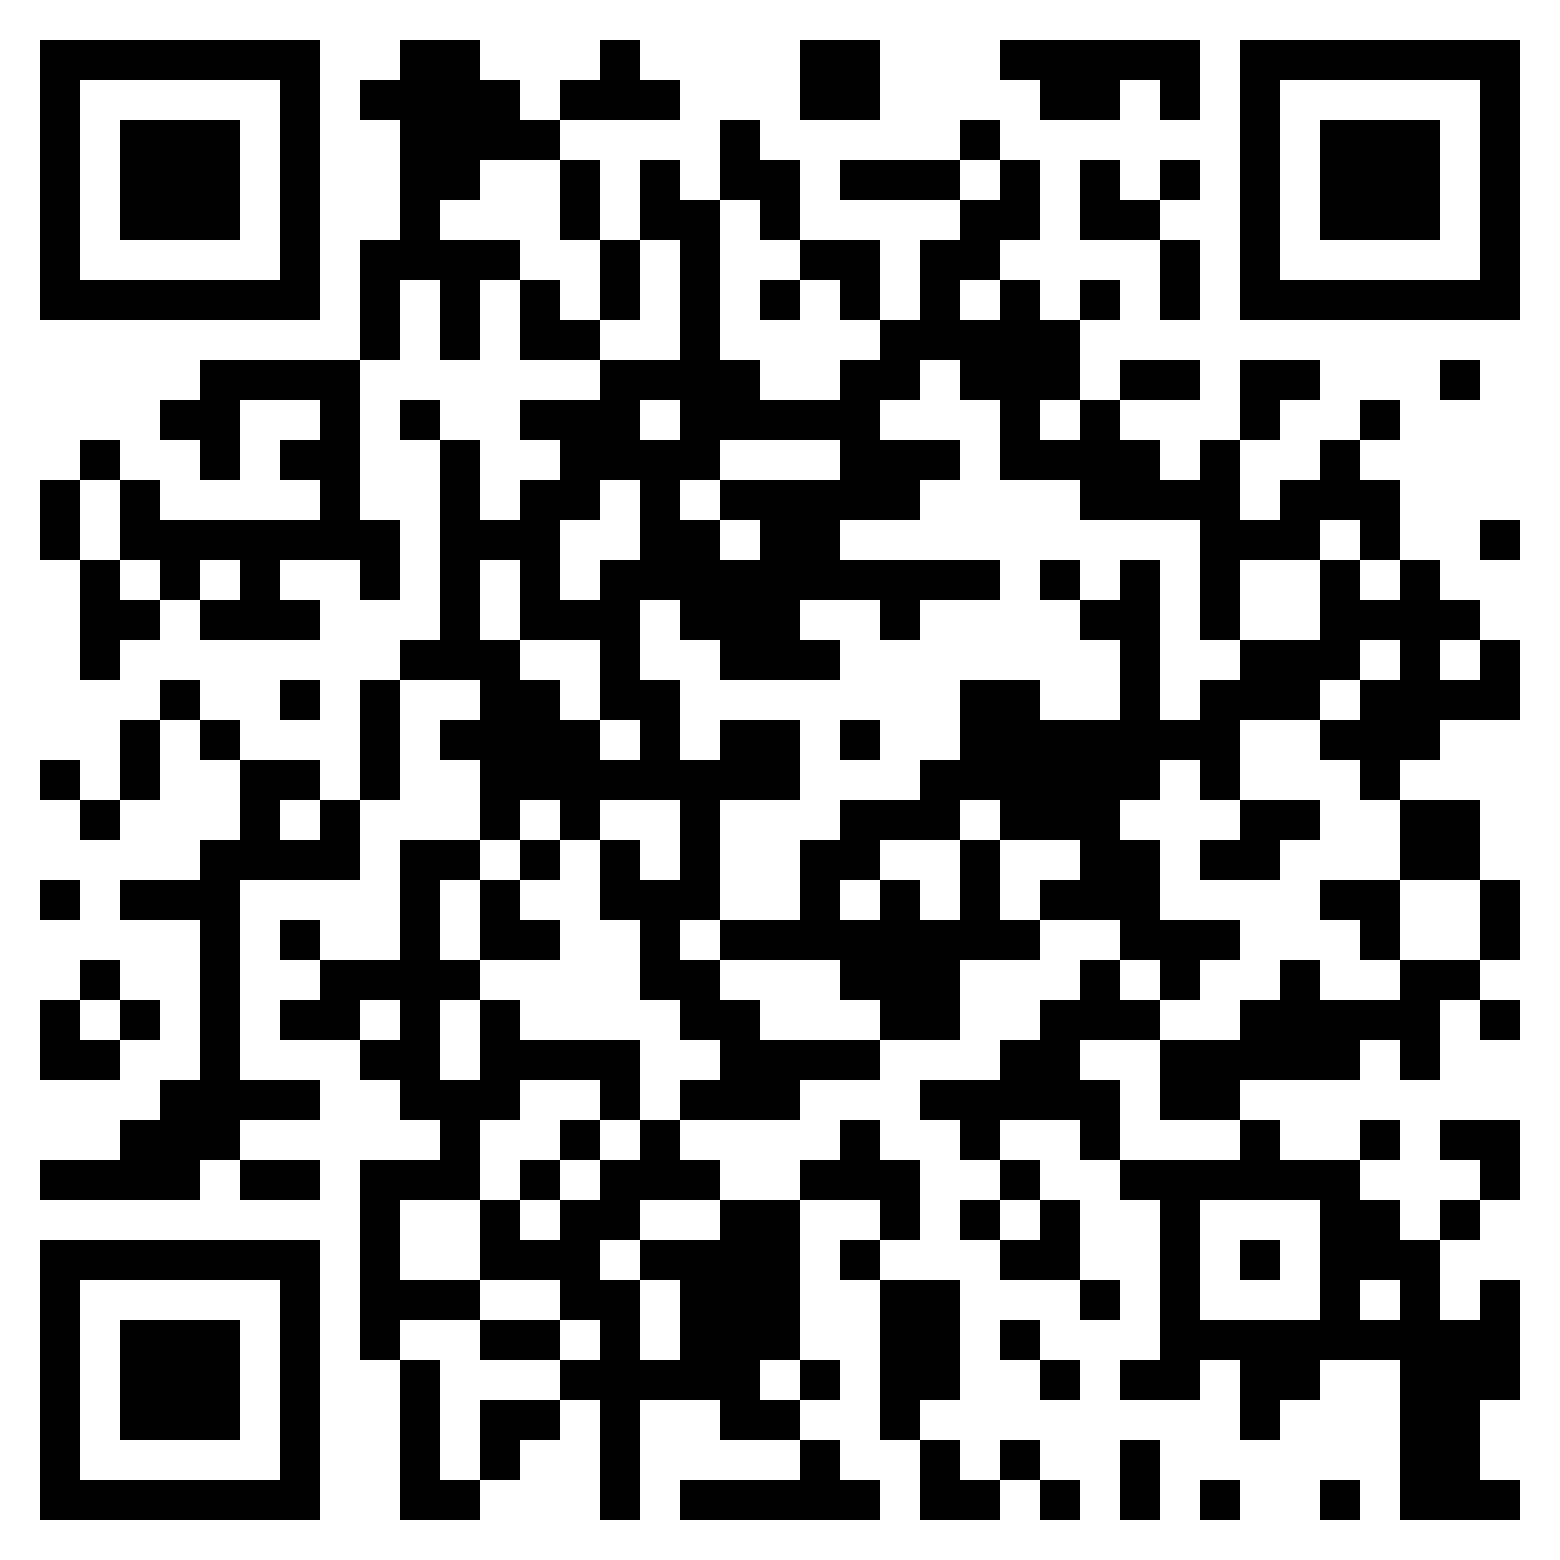 QR Code Image for The "HOG" 1/4" Roughing Endmill Bit For CNC Routers, 1/4" Shank